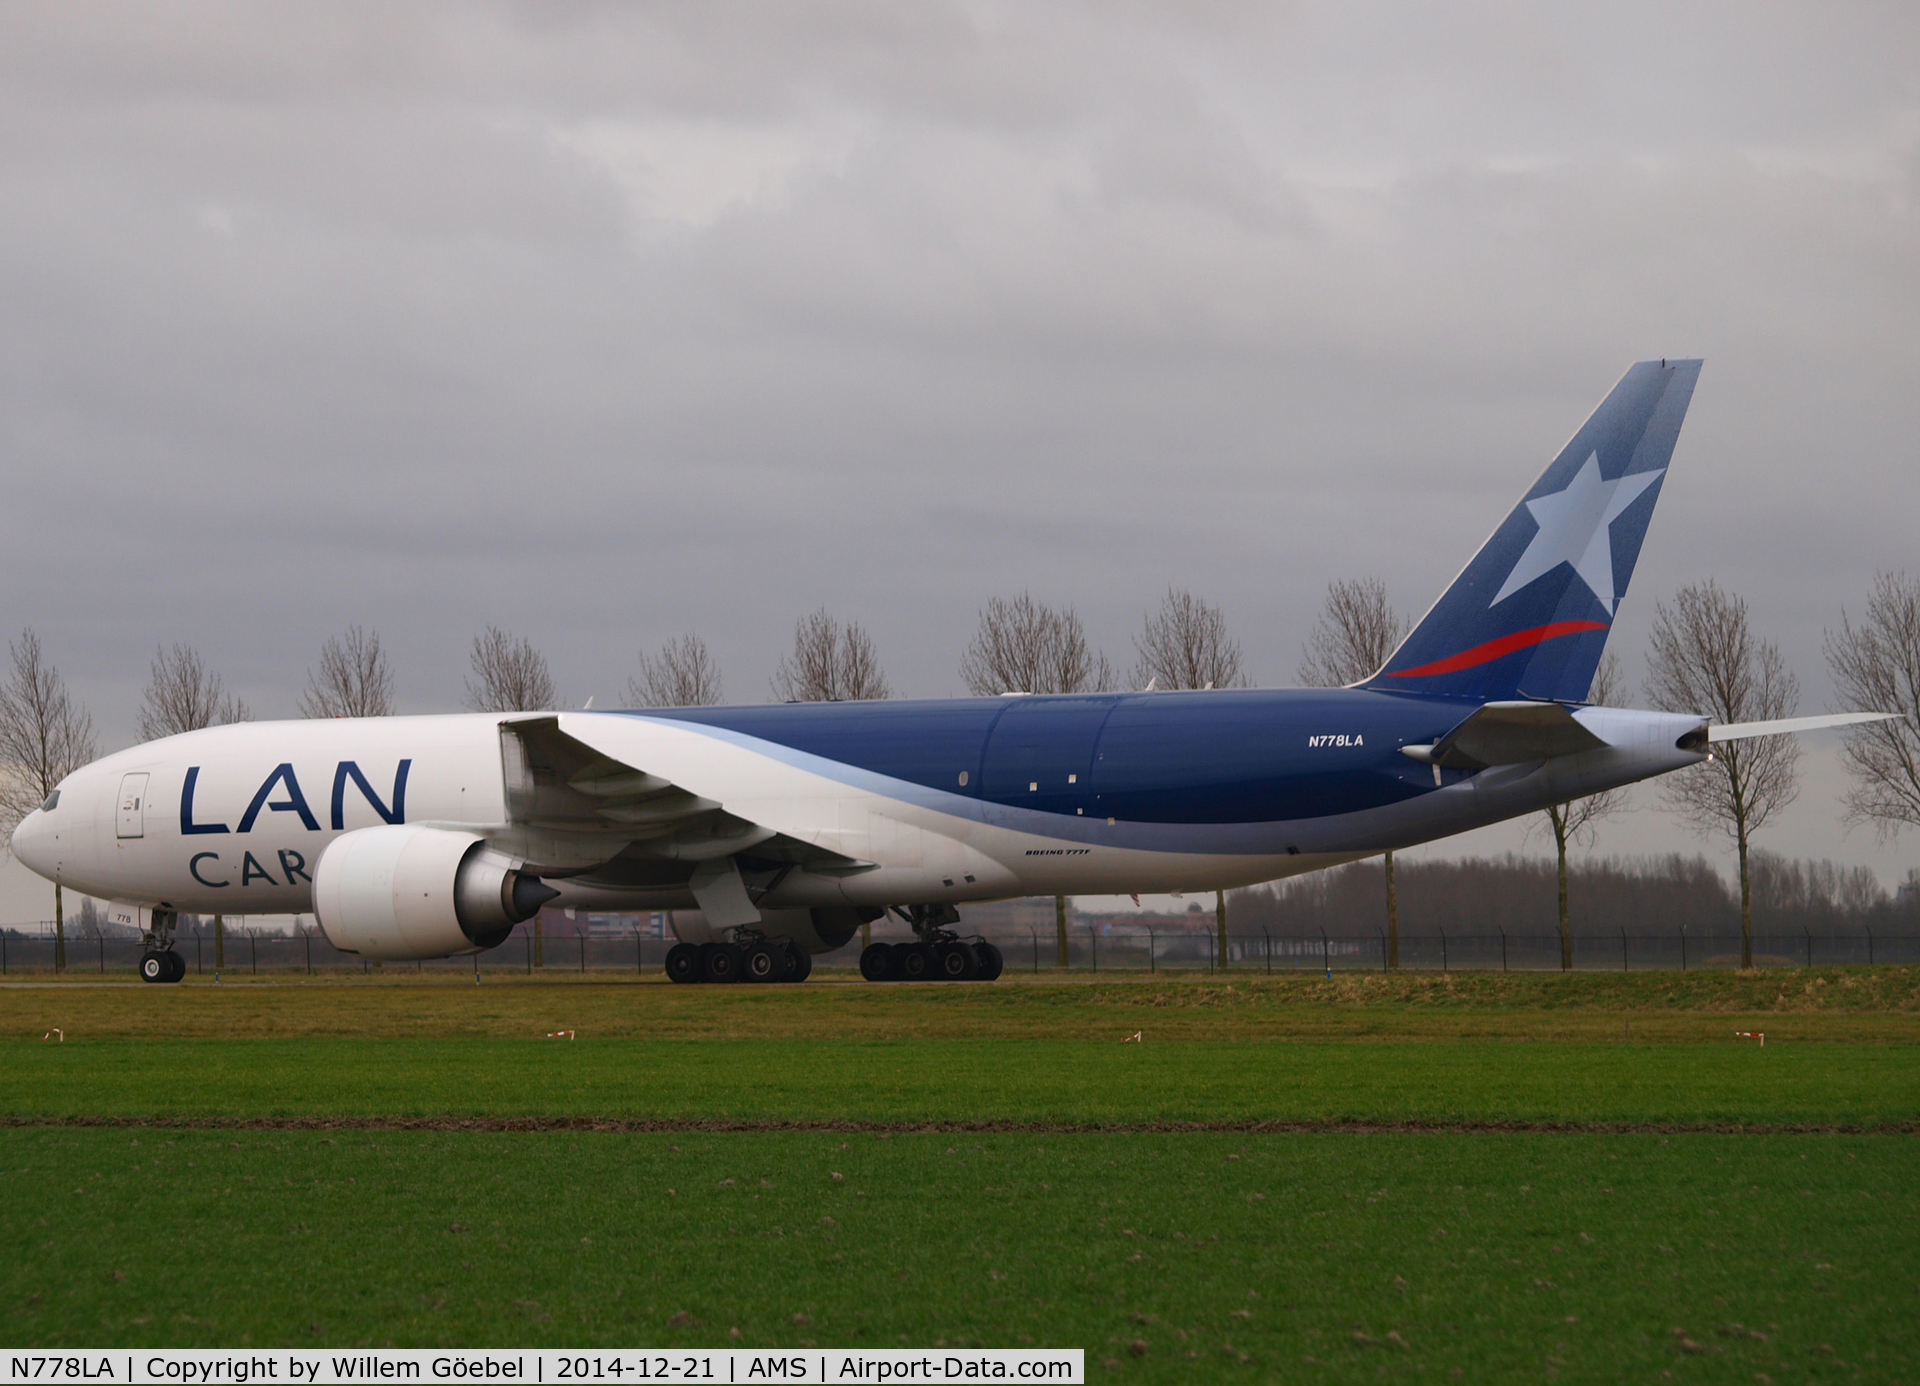 N778LA, 2012 Boeing 777-F6N C/N 41518, Taxi from runway 18R to the gate of Schiphol Airport